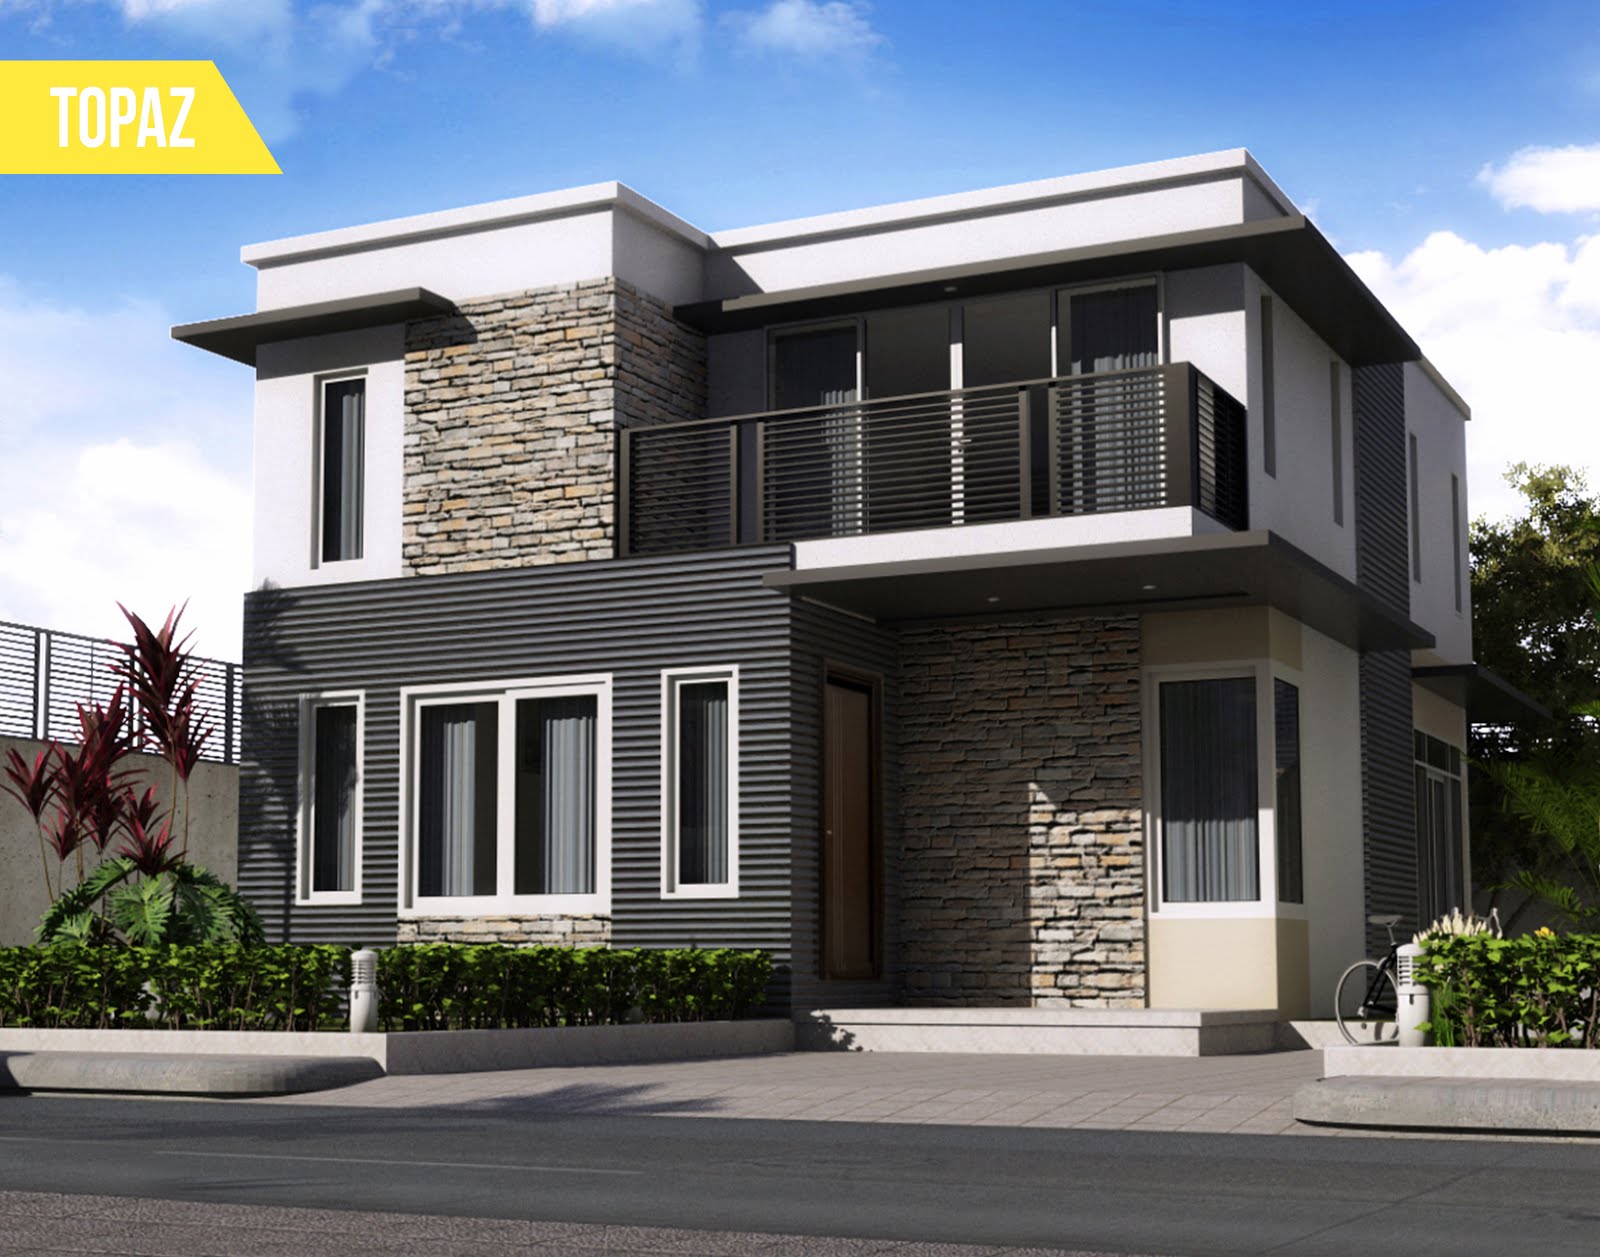 A Smart Philippine House Builder: Finding the Best New House Design